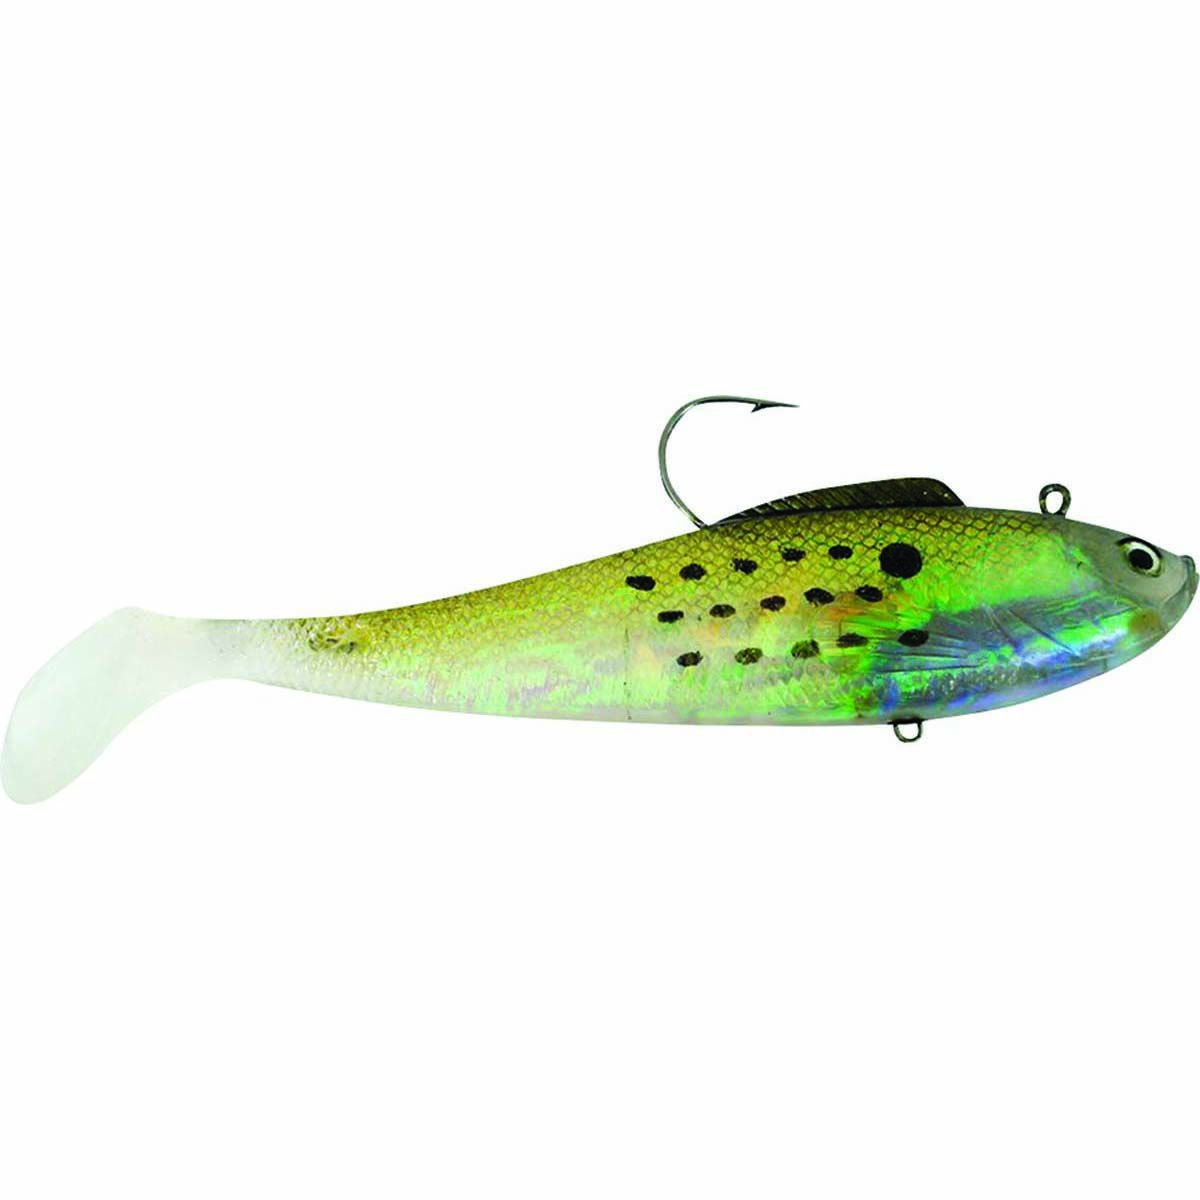 Reidy's Rubbers Soft Plastic Lure 5in Rainbow Trout